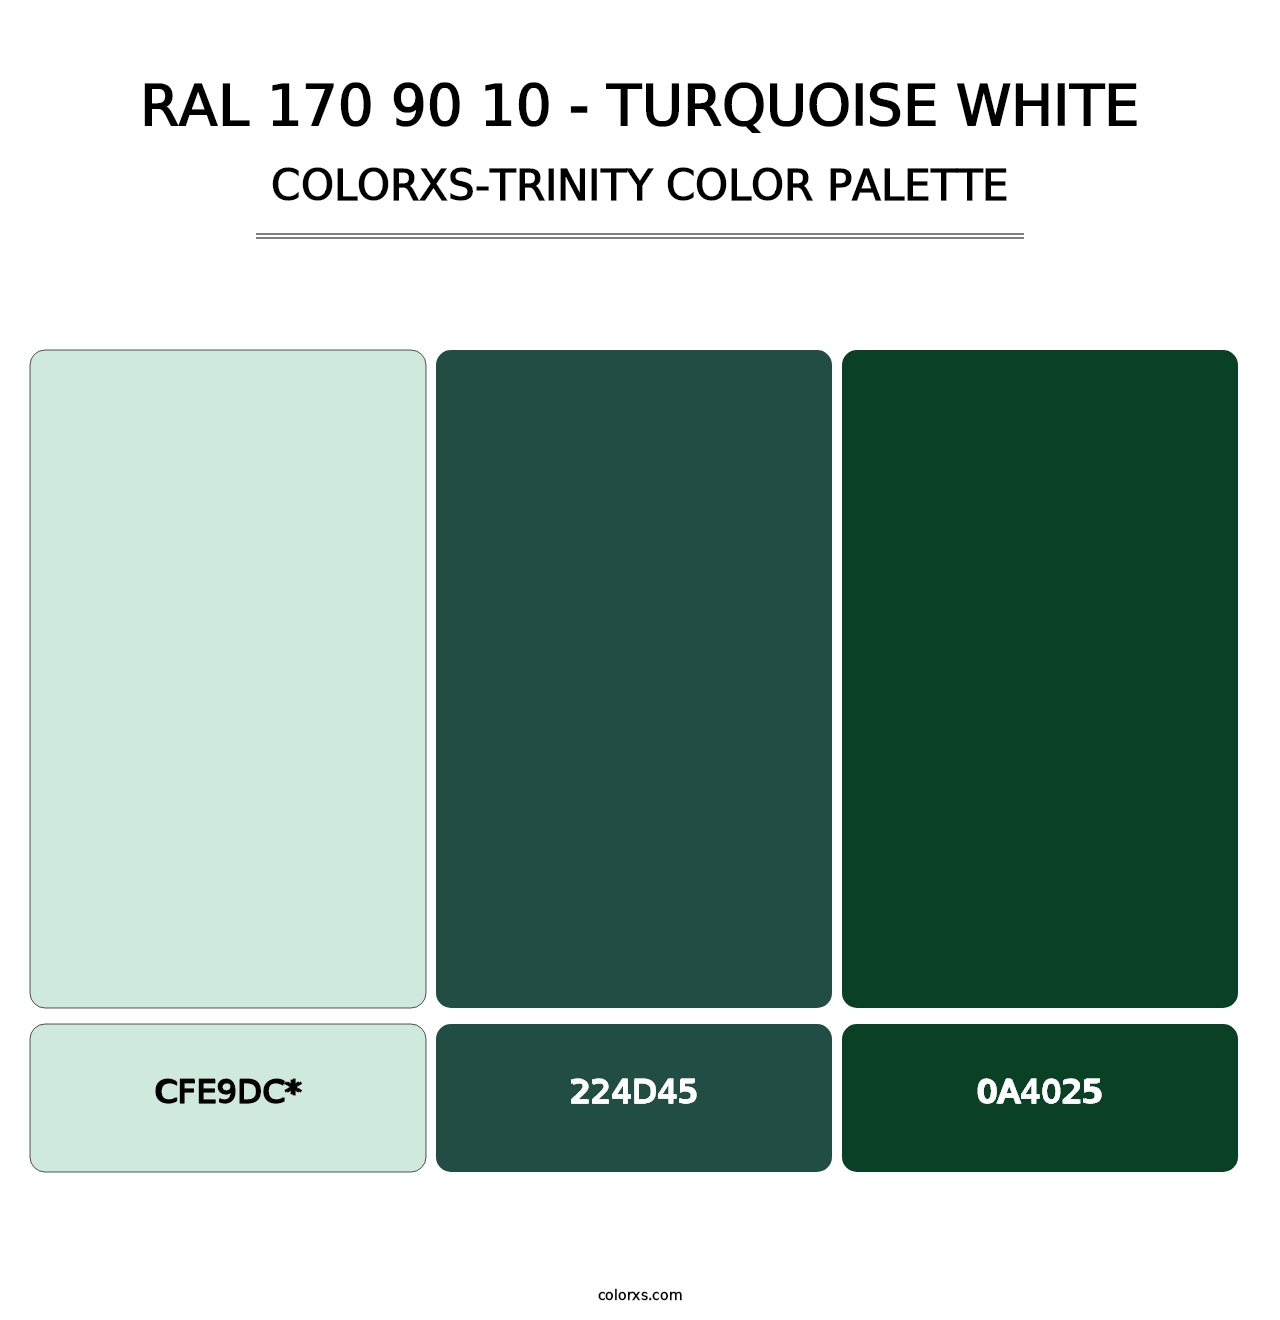 RAL 170 90 10 - Turquoise White - Colorxs Trinity Palette